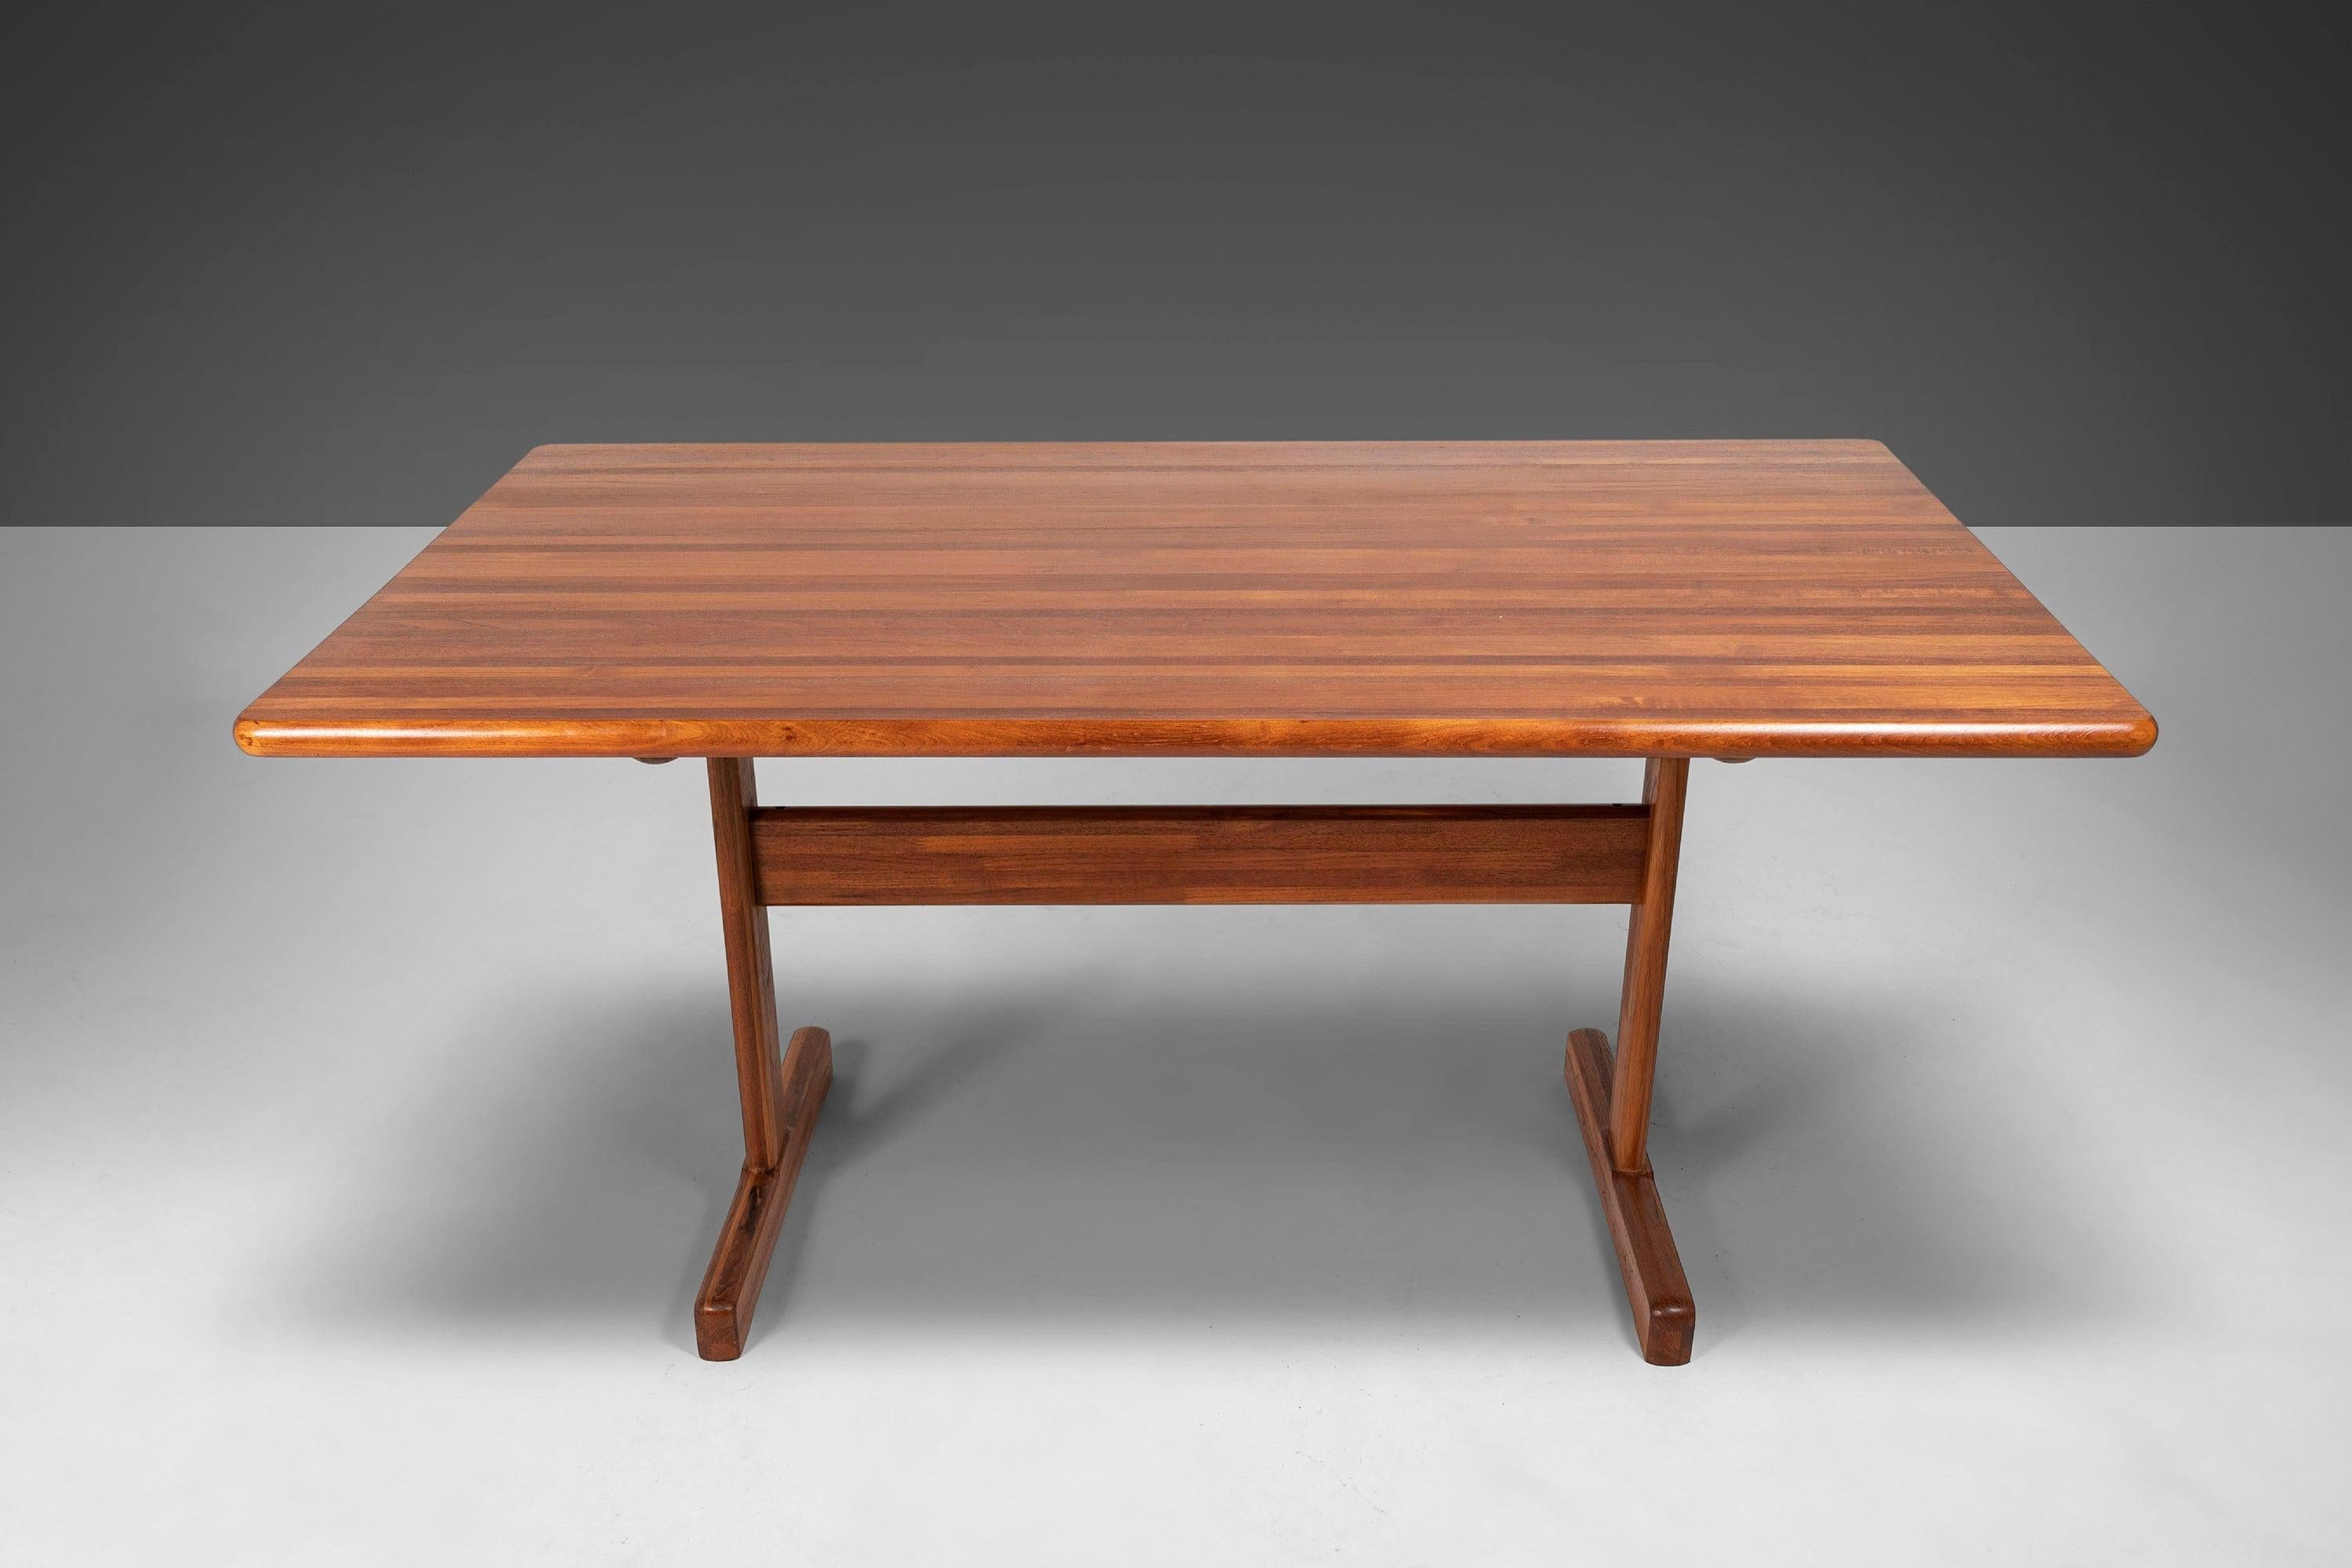 A newly refinished teak dining table which could also be used as an open workspace/desk. The teak butcherblock tabletop is stunning with varying shades of amber. Set on an angular t-base tied together by a crossbeam. Seats 4-6.